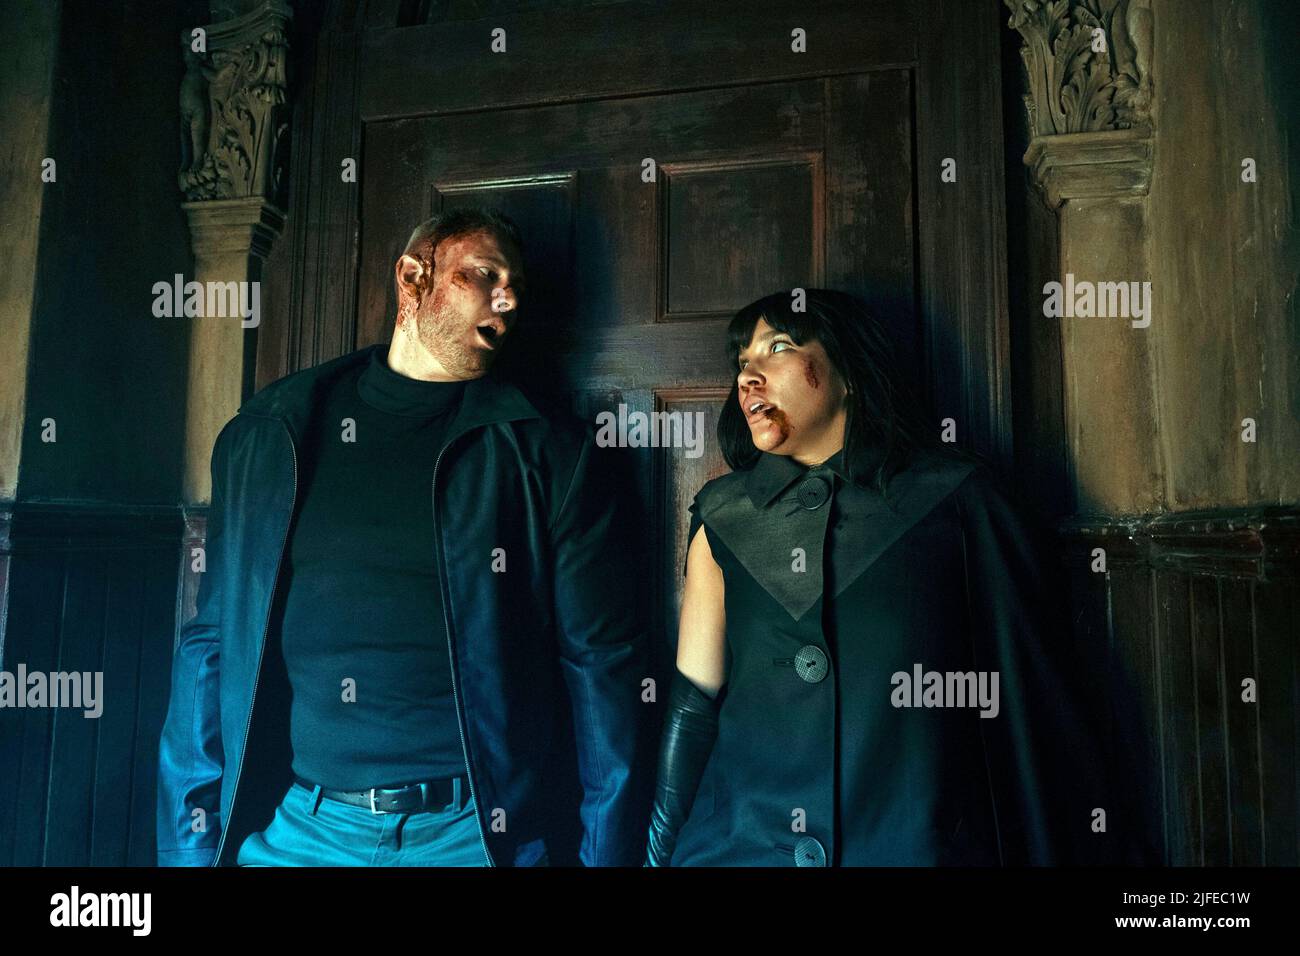 TOM HOPPER and EMMY RAVER-LAMPMAN in THE UMBRELLA ACADEMY (2019), directed by JEREMY SLATER. Credit: NETFLIX / Album Stock Photo